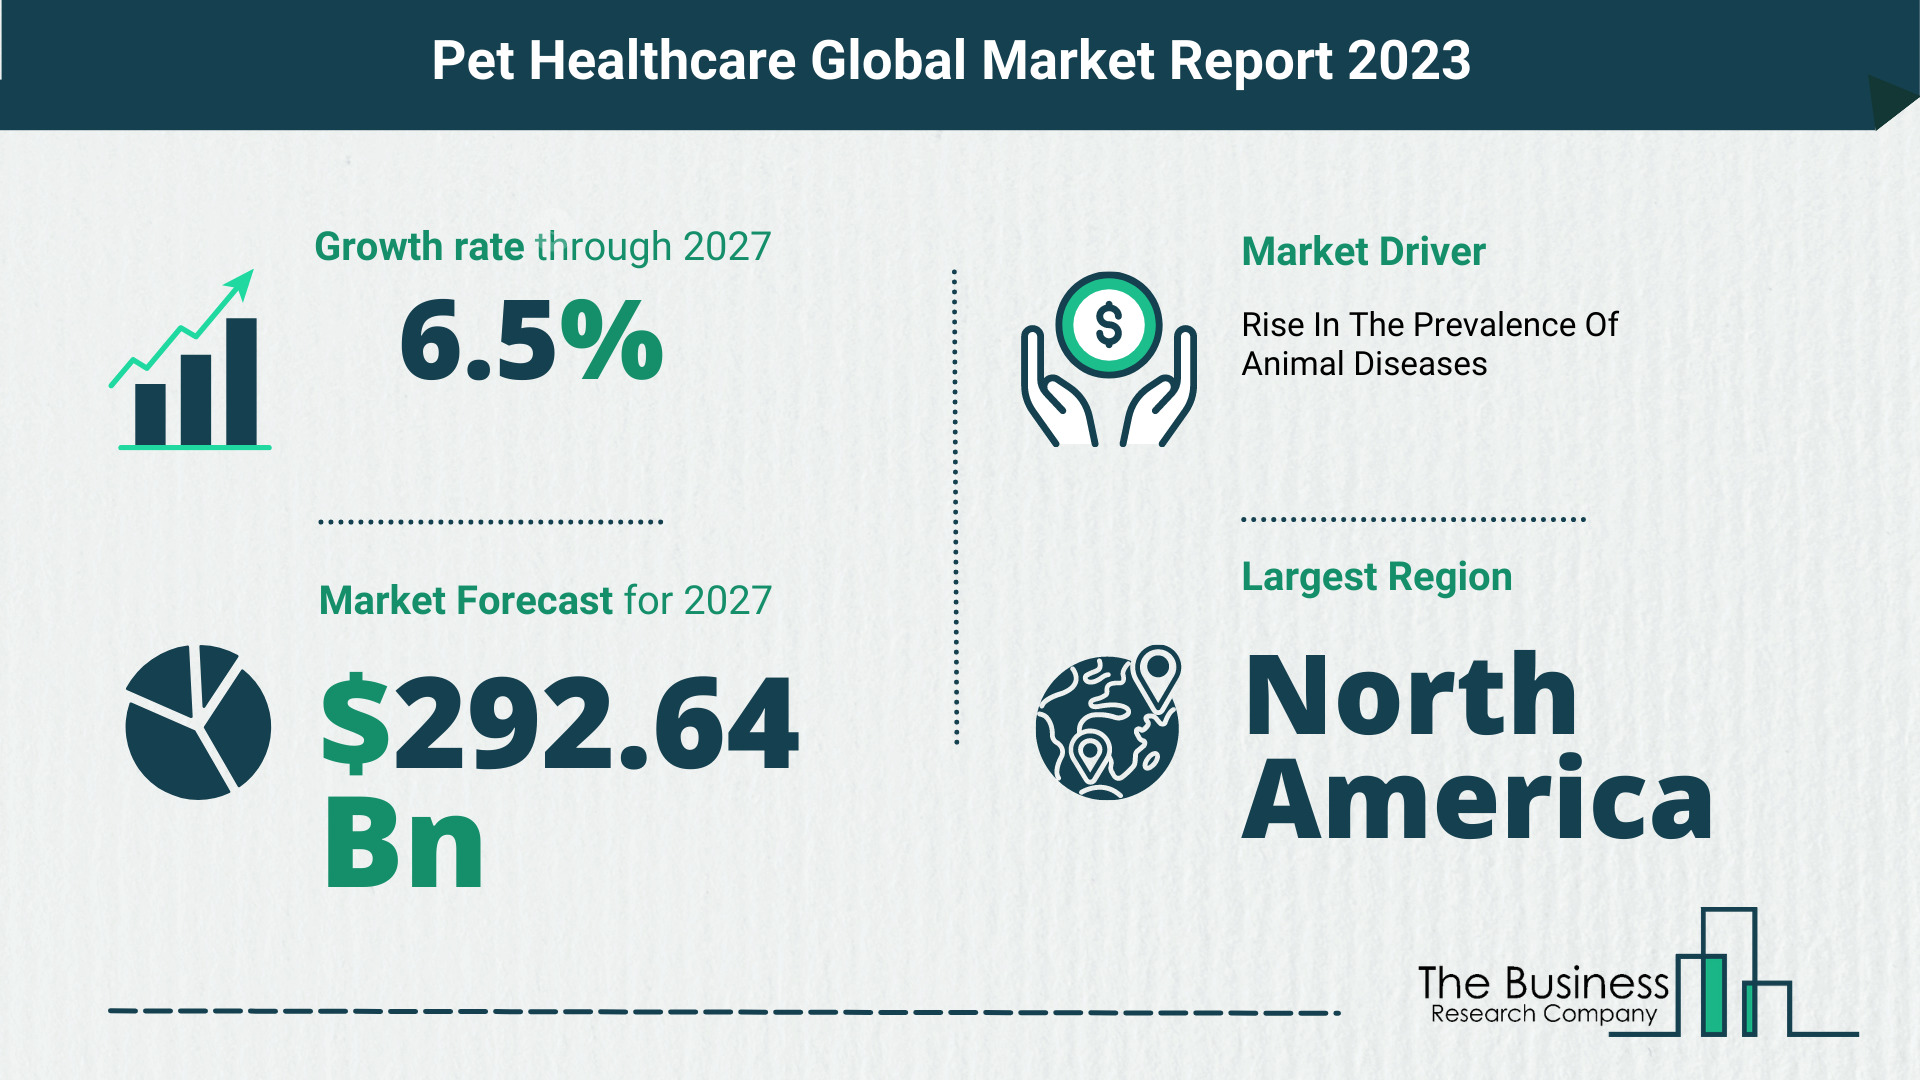 How Will The Pet Healthcare Market Globally Expand In 2023?